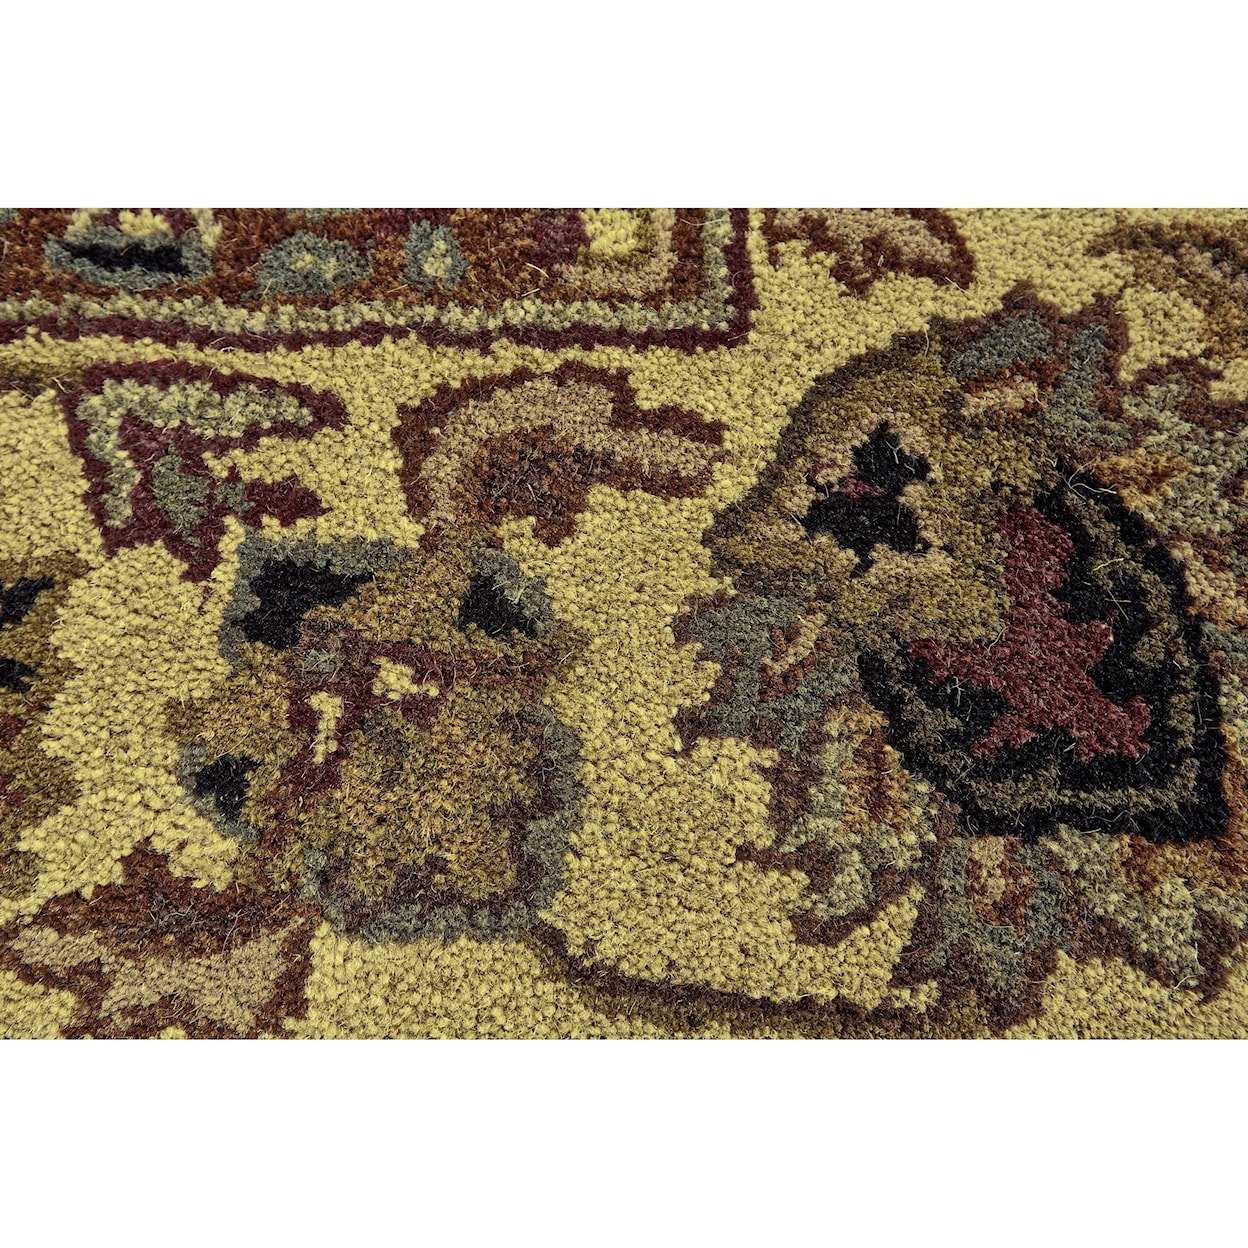 Feizy Rugs Yale Black/Gold 2'-3" x 8' Runner Rug